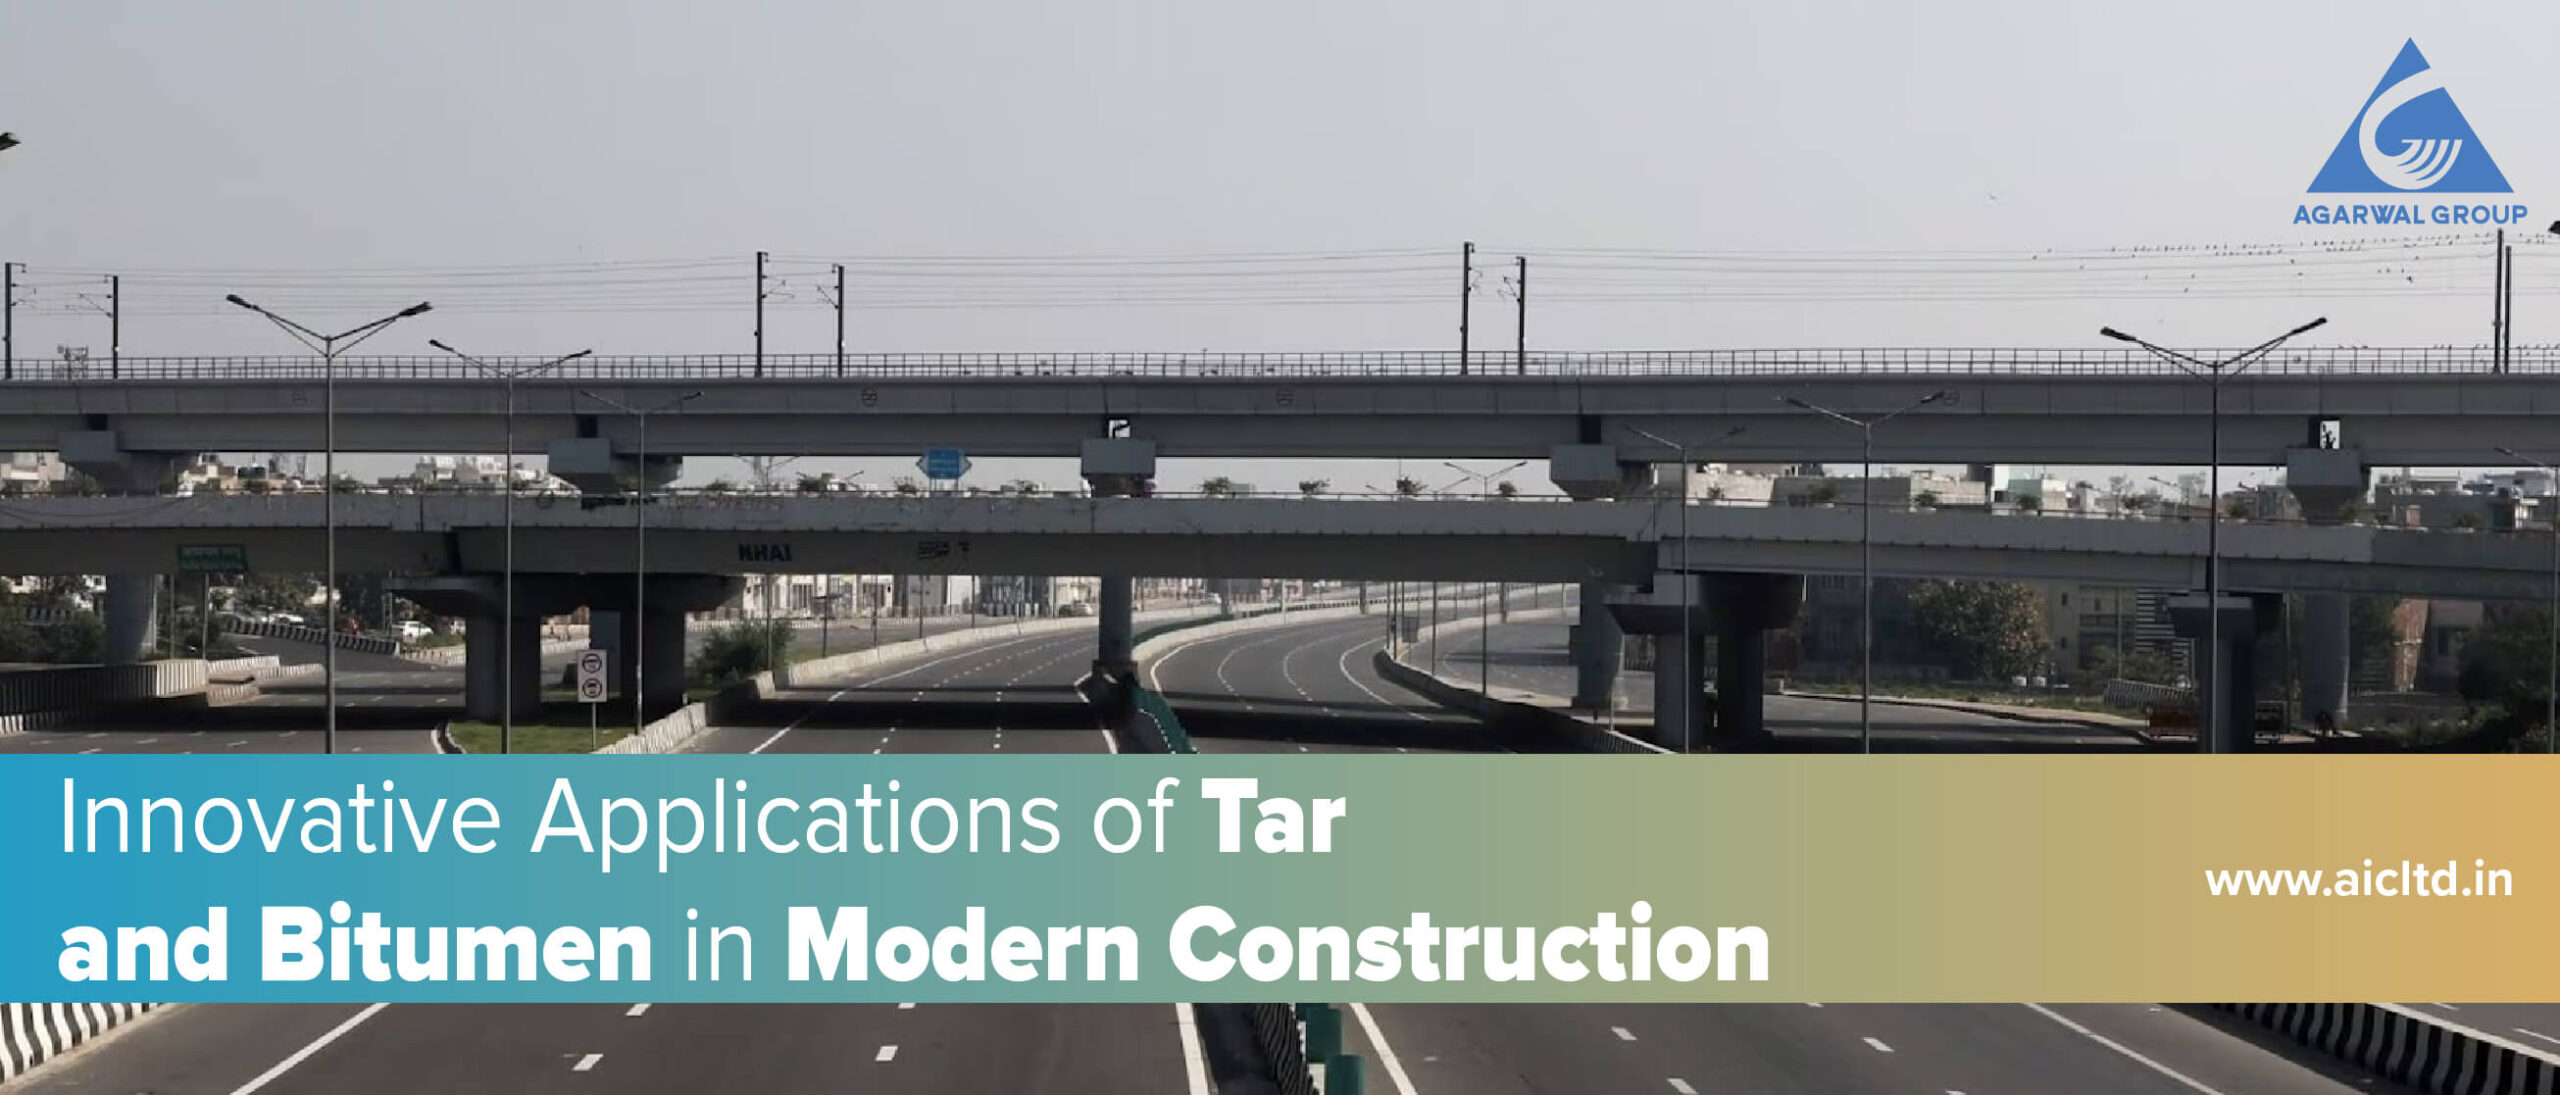 Innovative Applications of Tar and Bitumen in Modern Construction